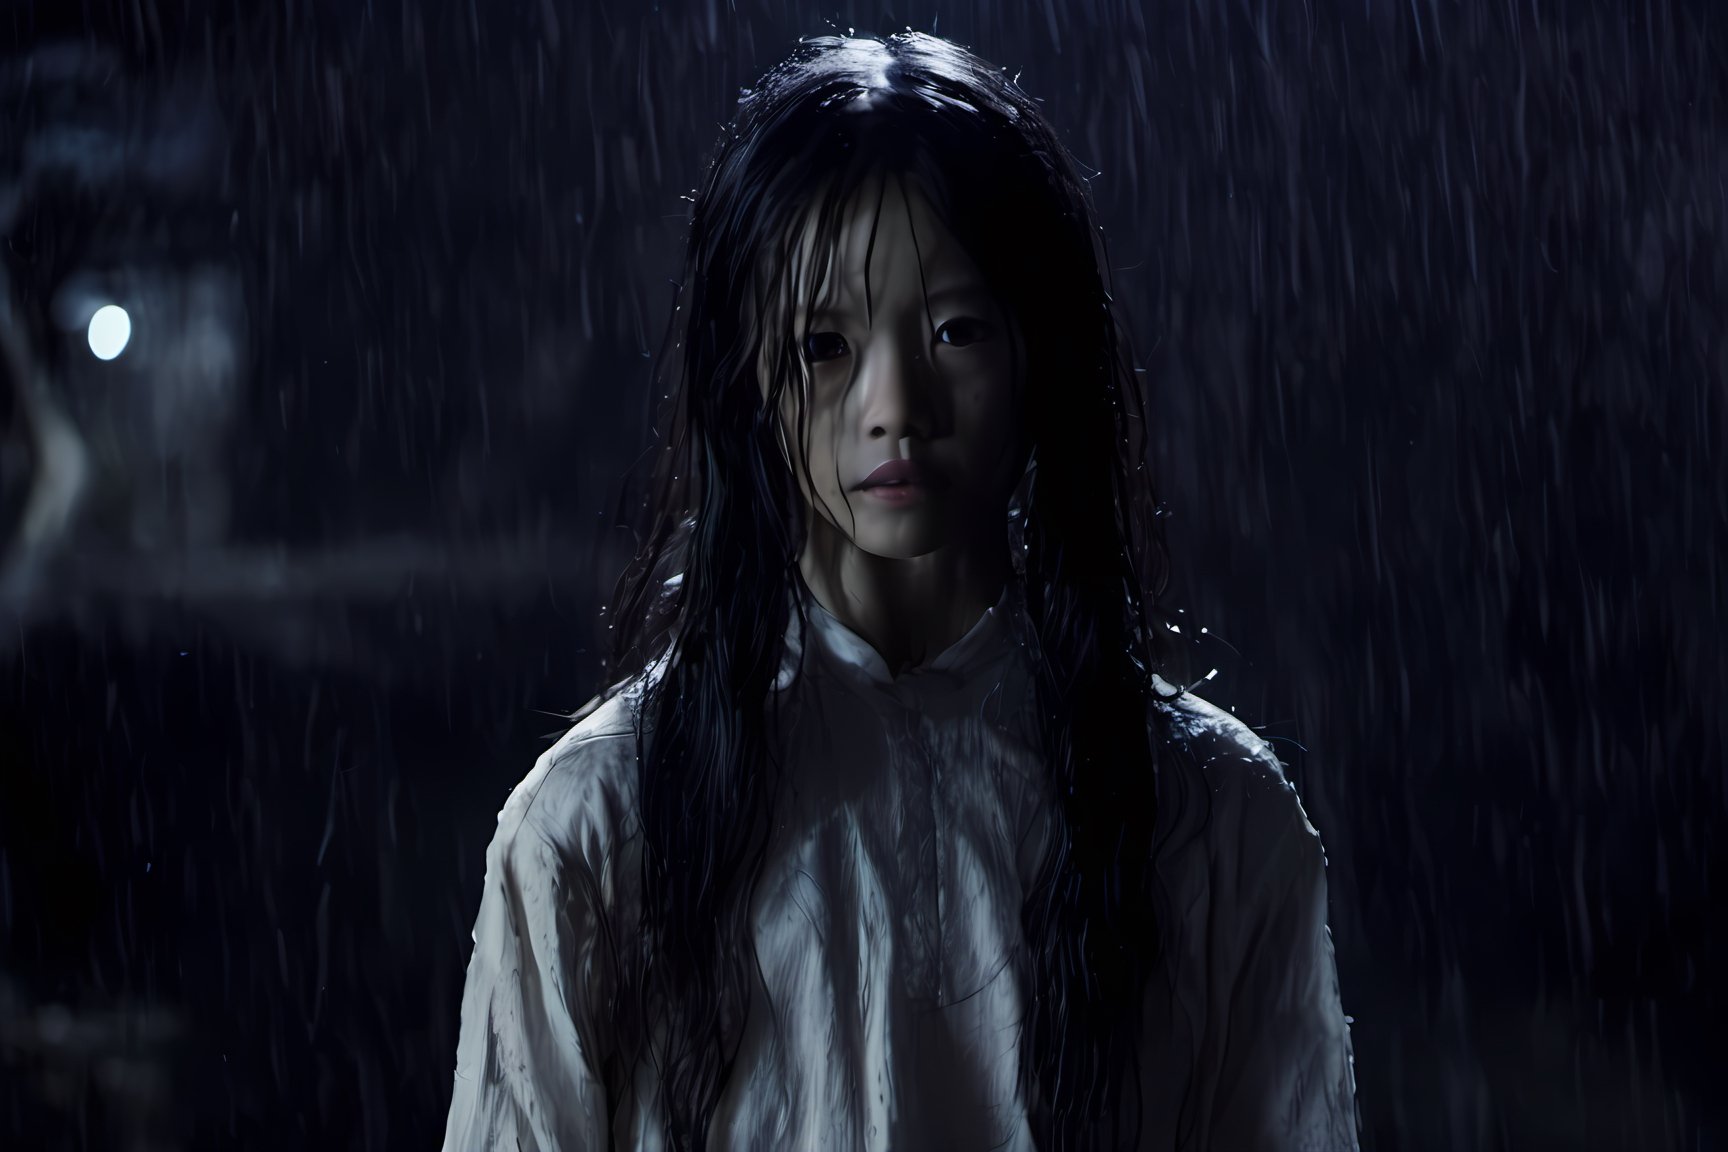 Onryo from the movie The Ring, wet messy hair, high quality, haunted house background, spooky, ghostly appearance